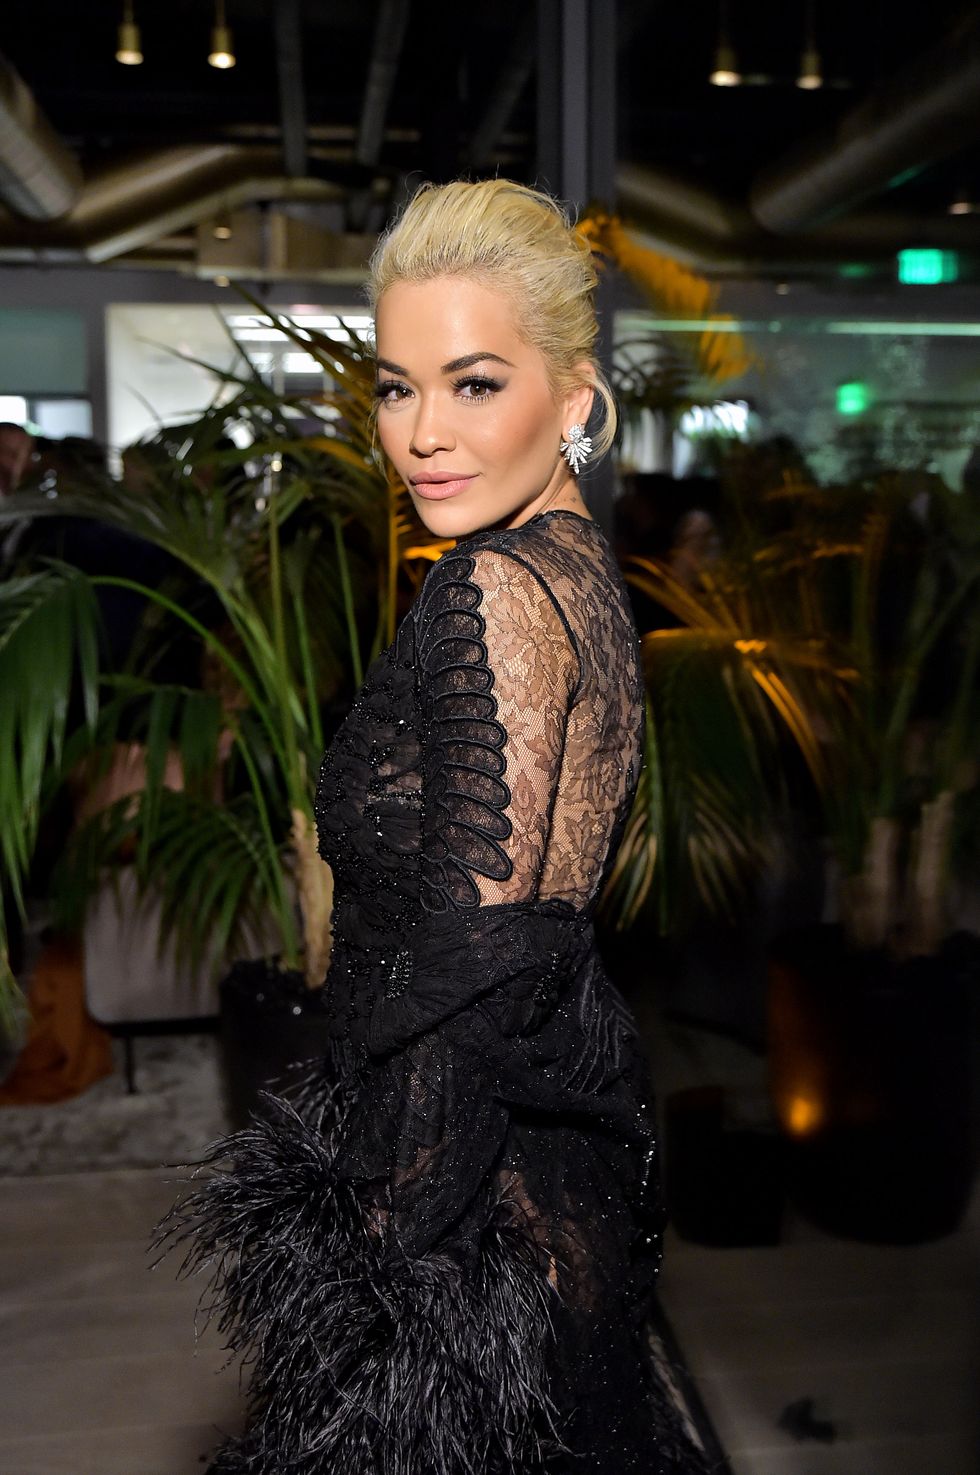 Andrew Garfield and Rita Ora have apparently split, because he 'wants something more private'